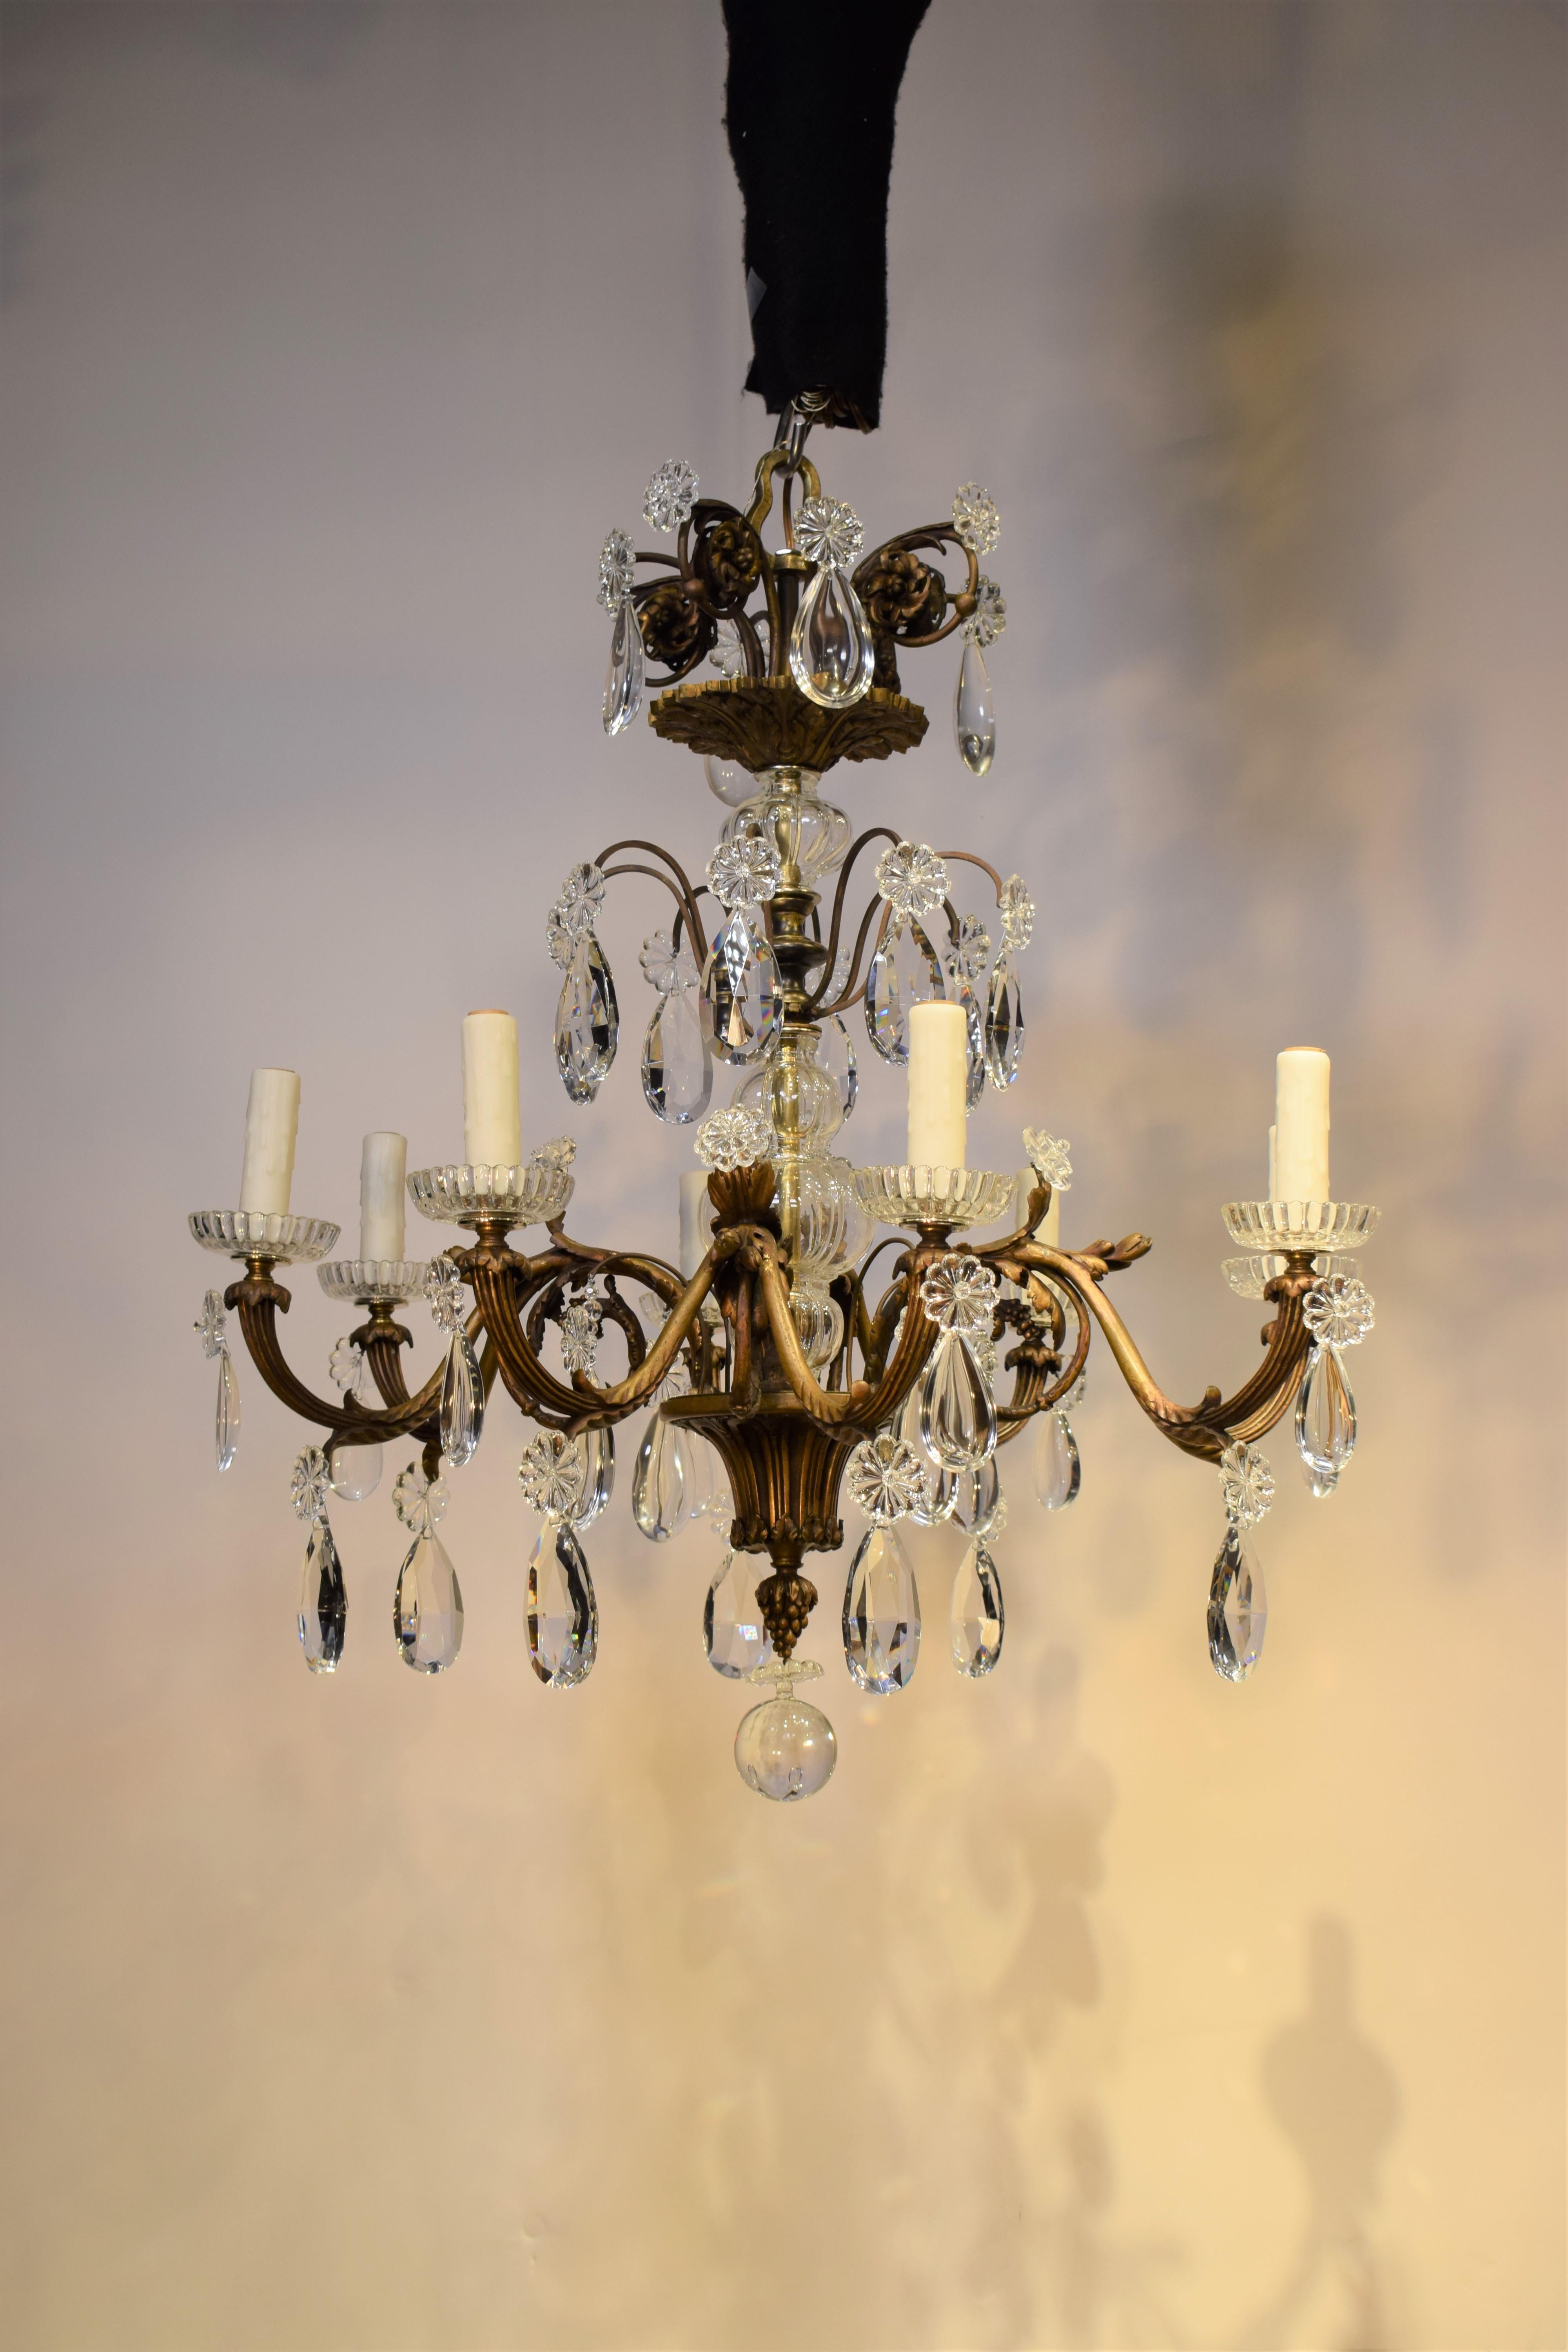 A very fine and decorative Louis XV style gilt bronze chandelier featuring hand cut crystal pendalogues. France, circa 1920. 8 Lights.
Dimensions: height 30